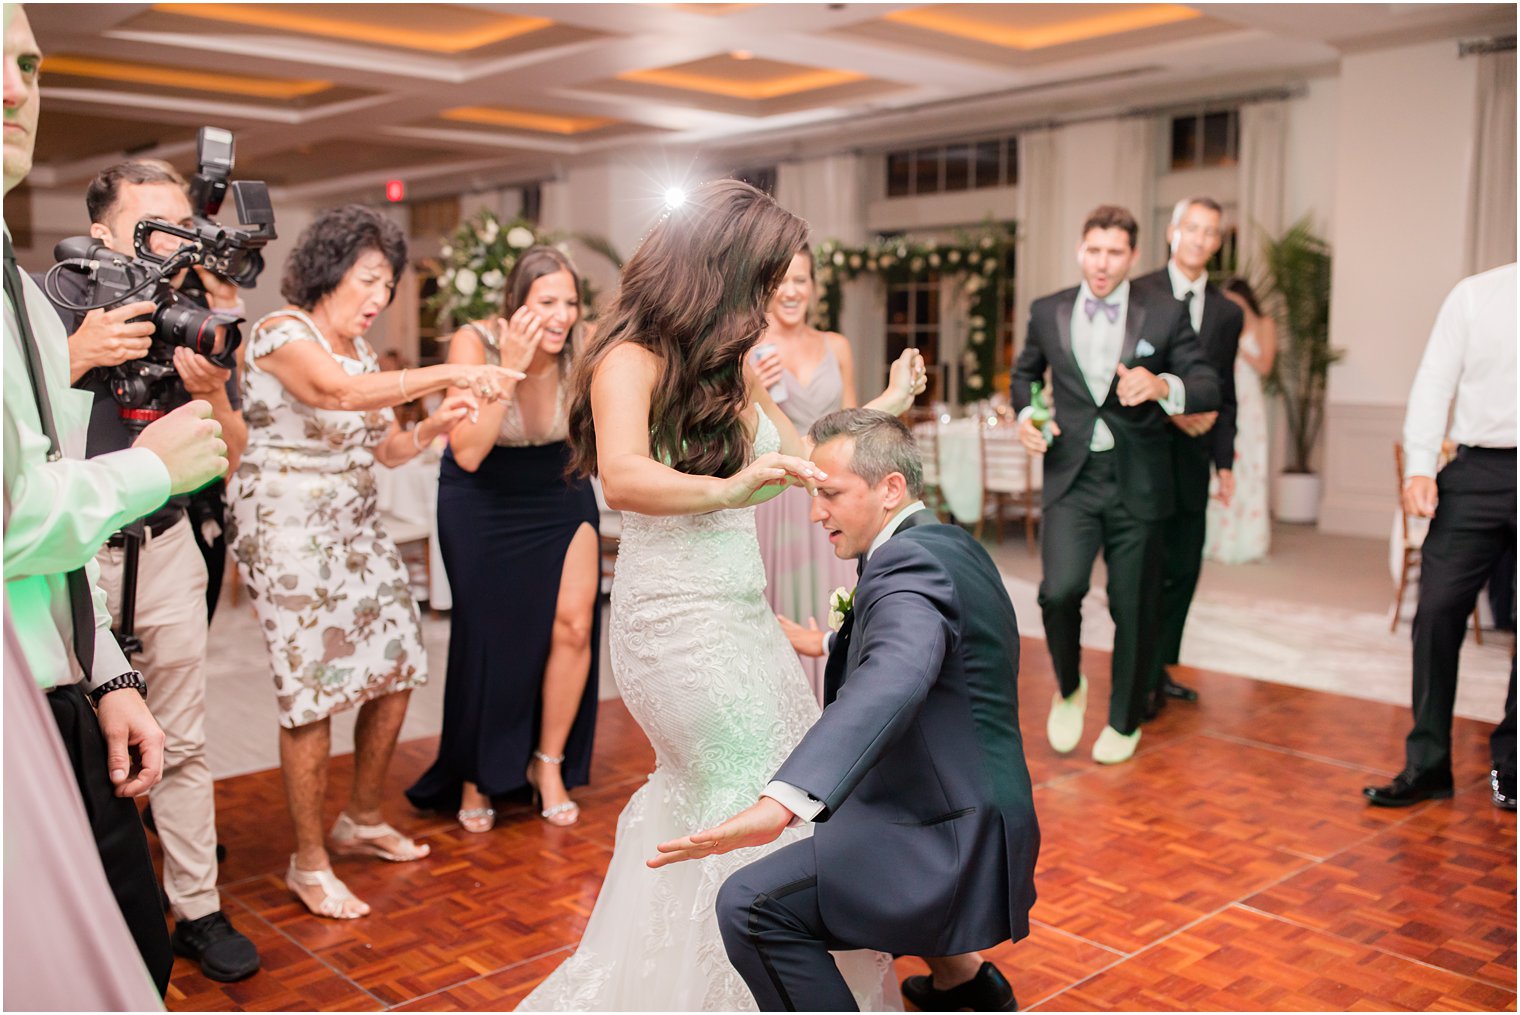 newlyweds dance during wedding reception on dance floor with guests